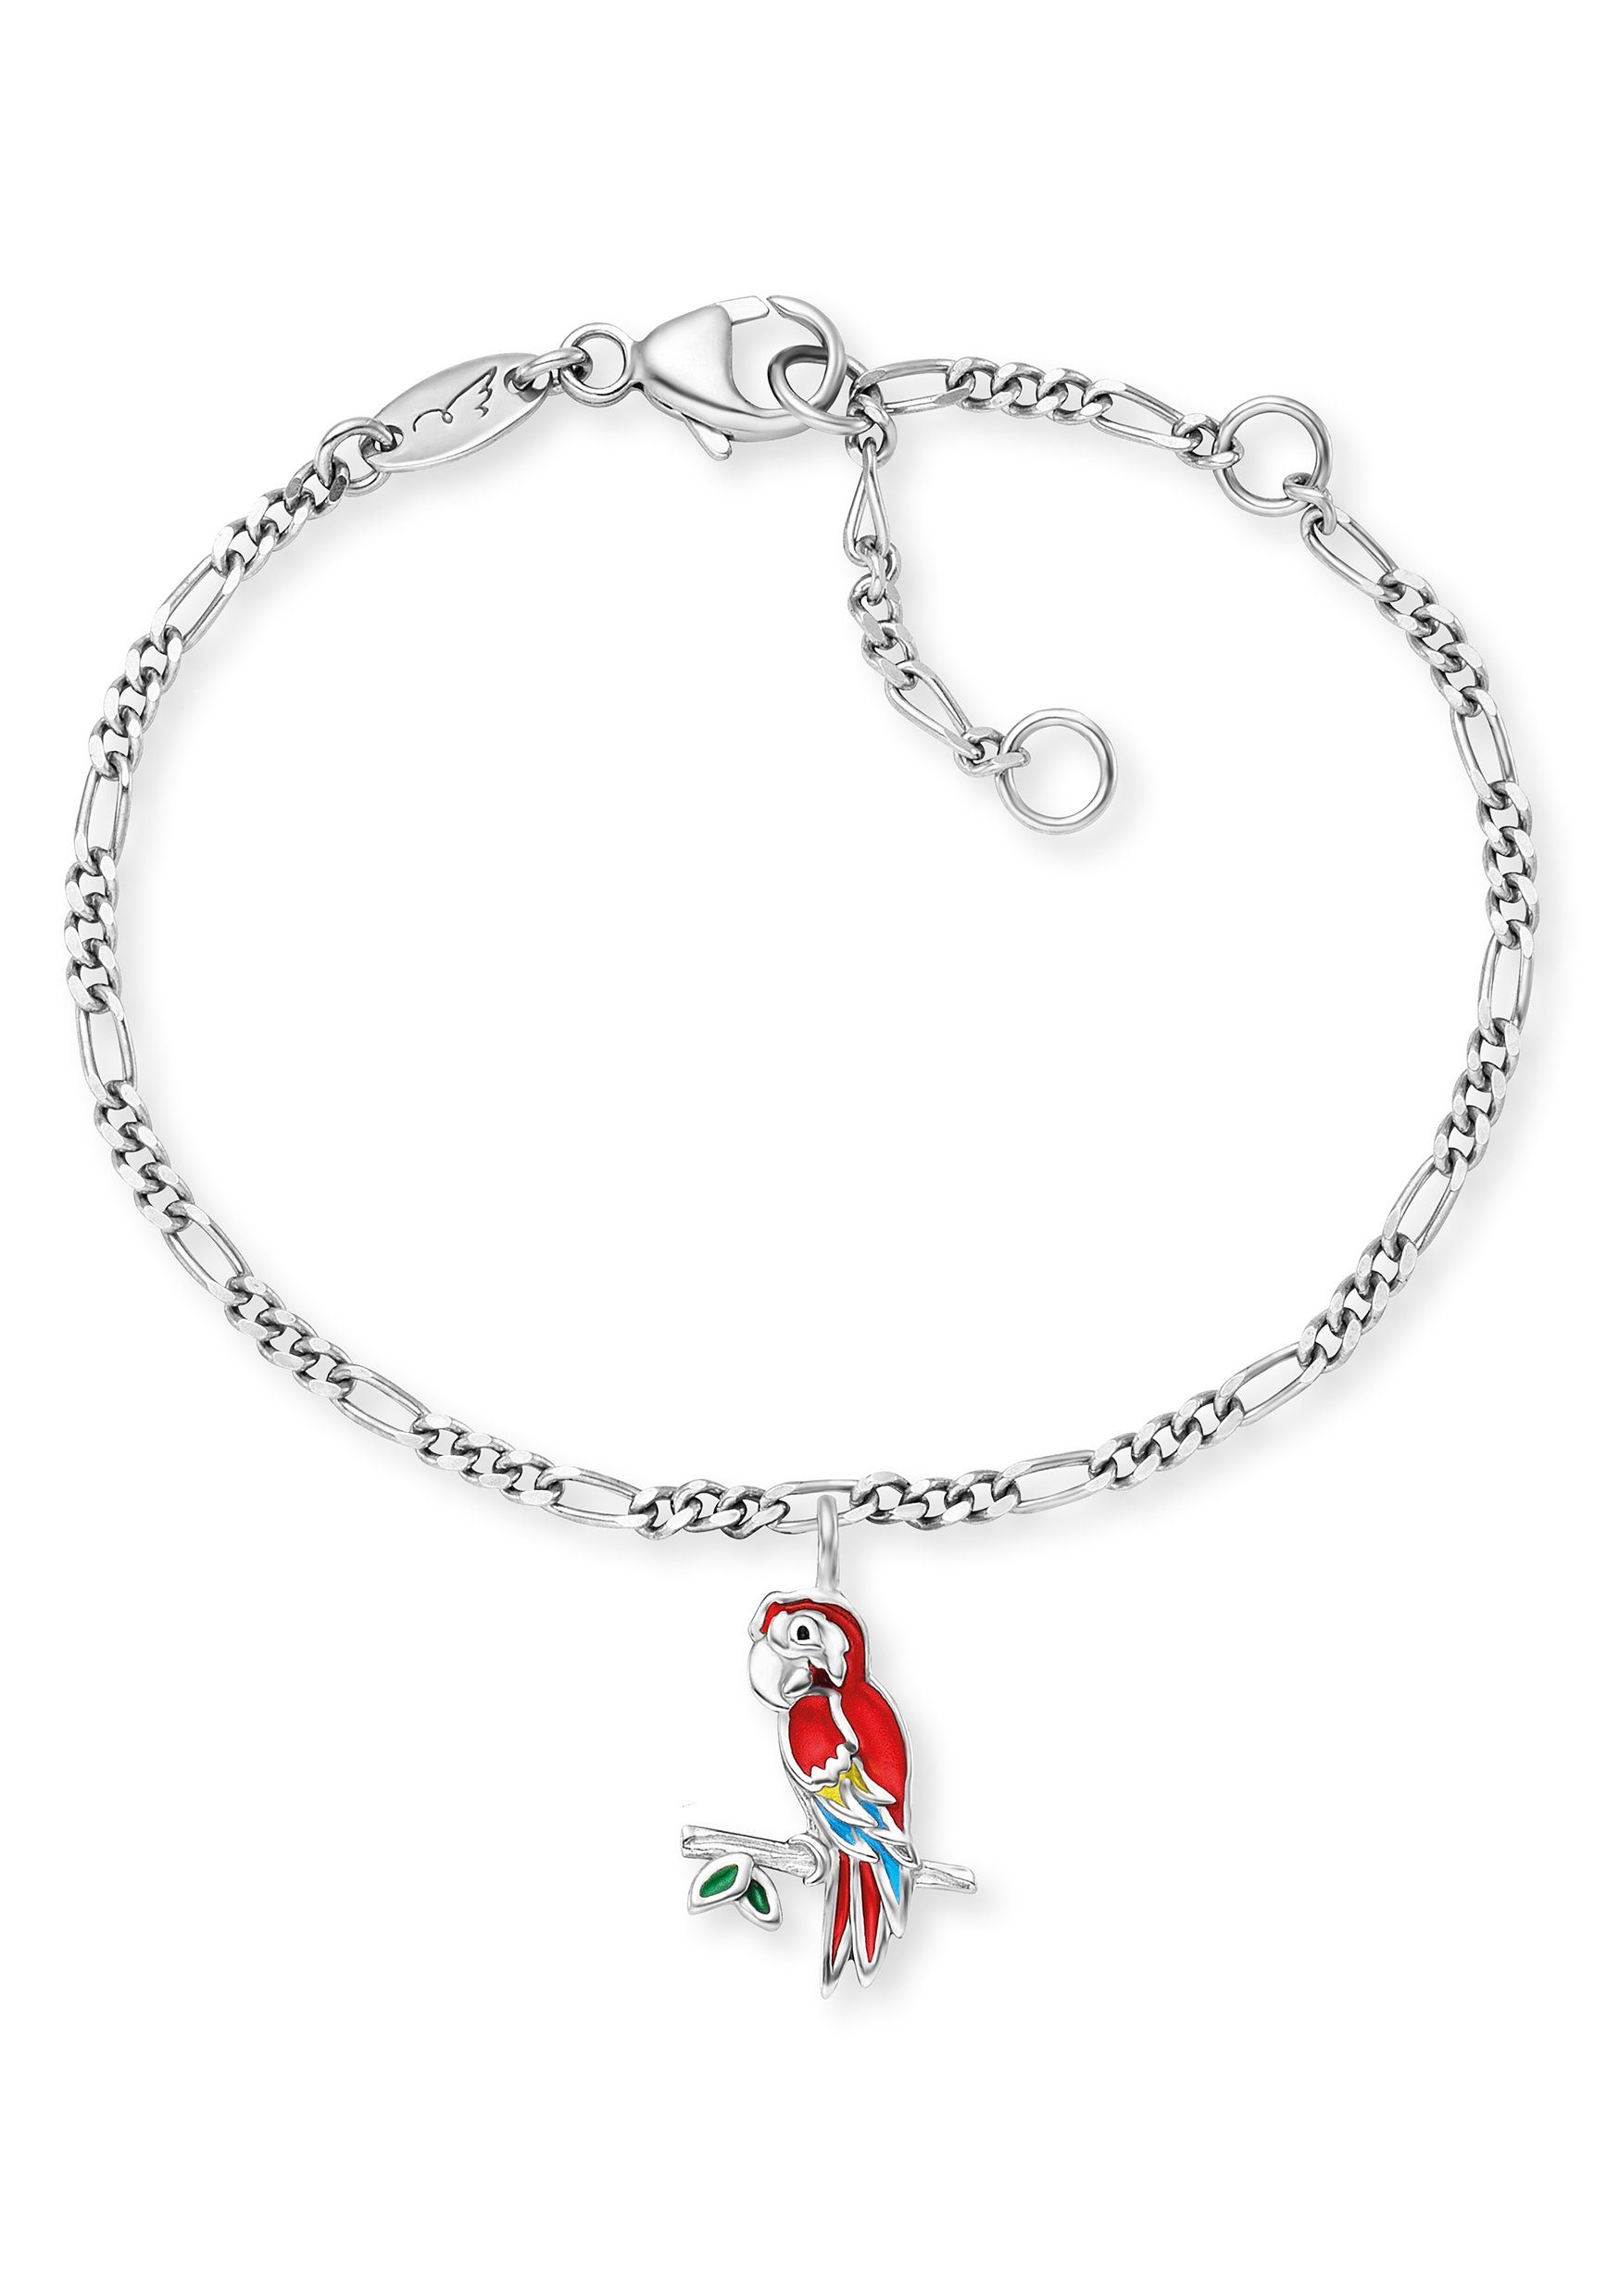 Herzengel Armband Papagei, HEB-PARROT, Emaille mit